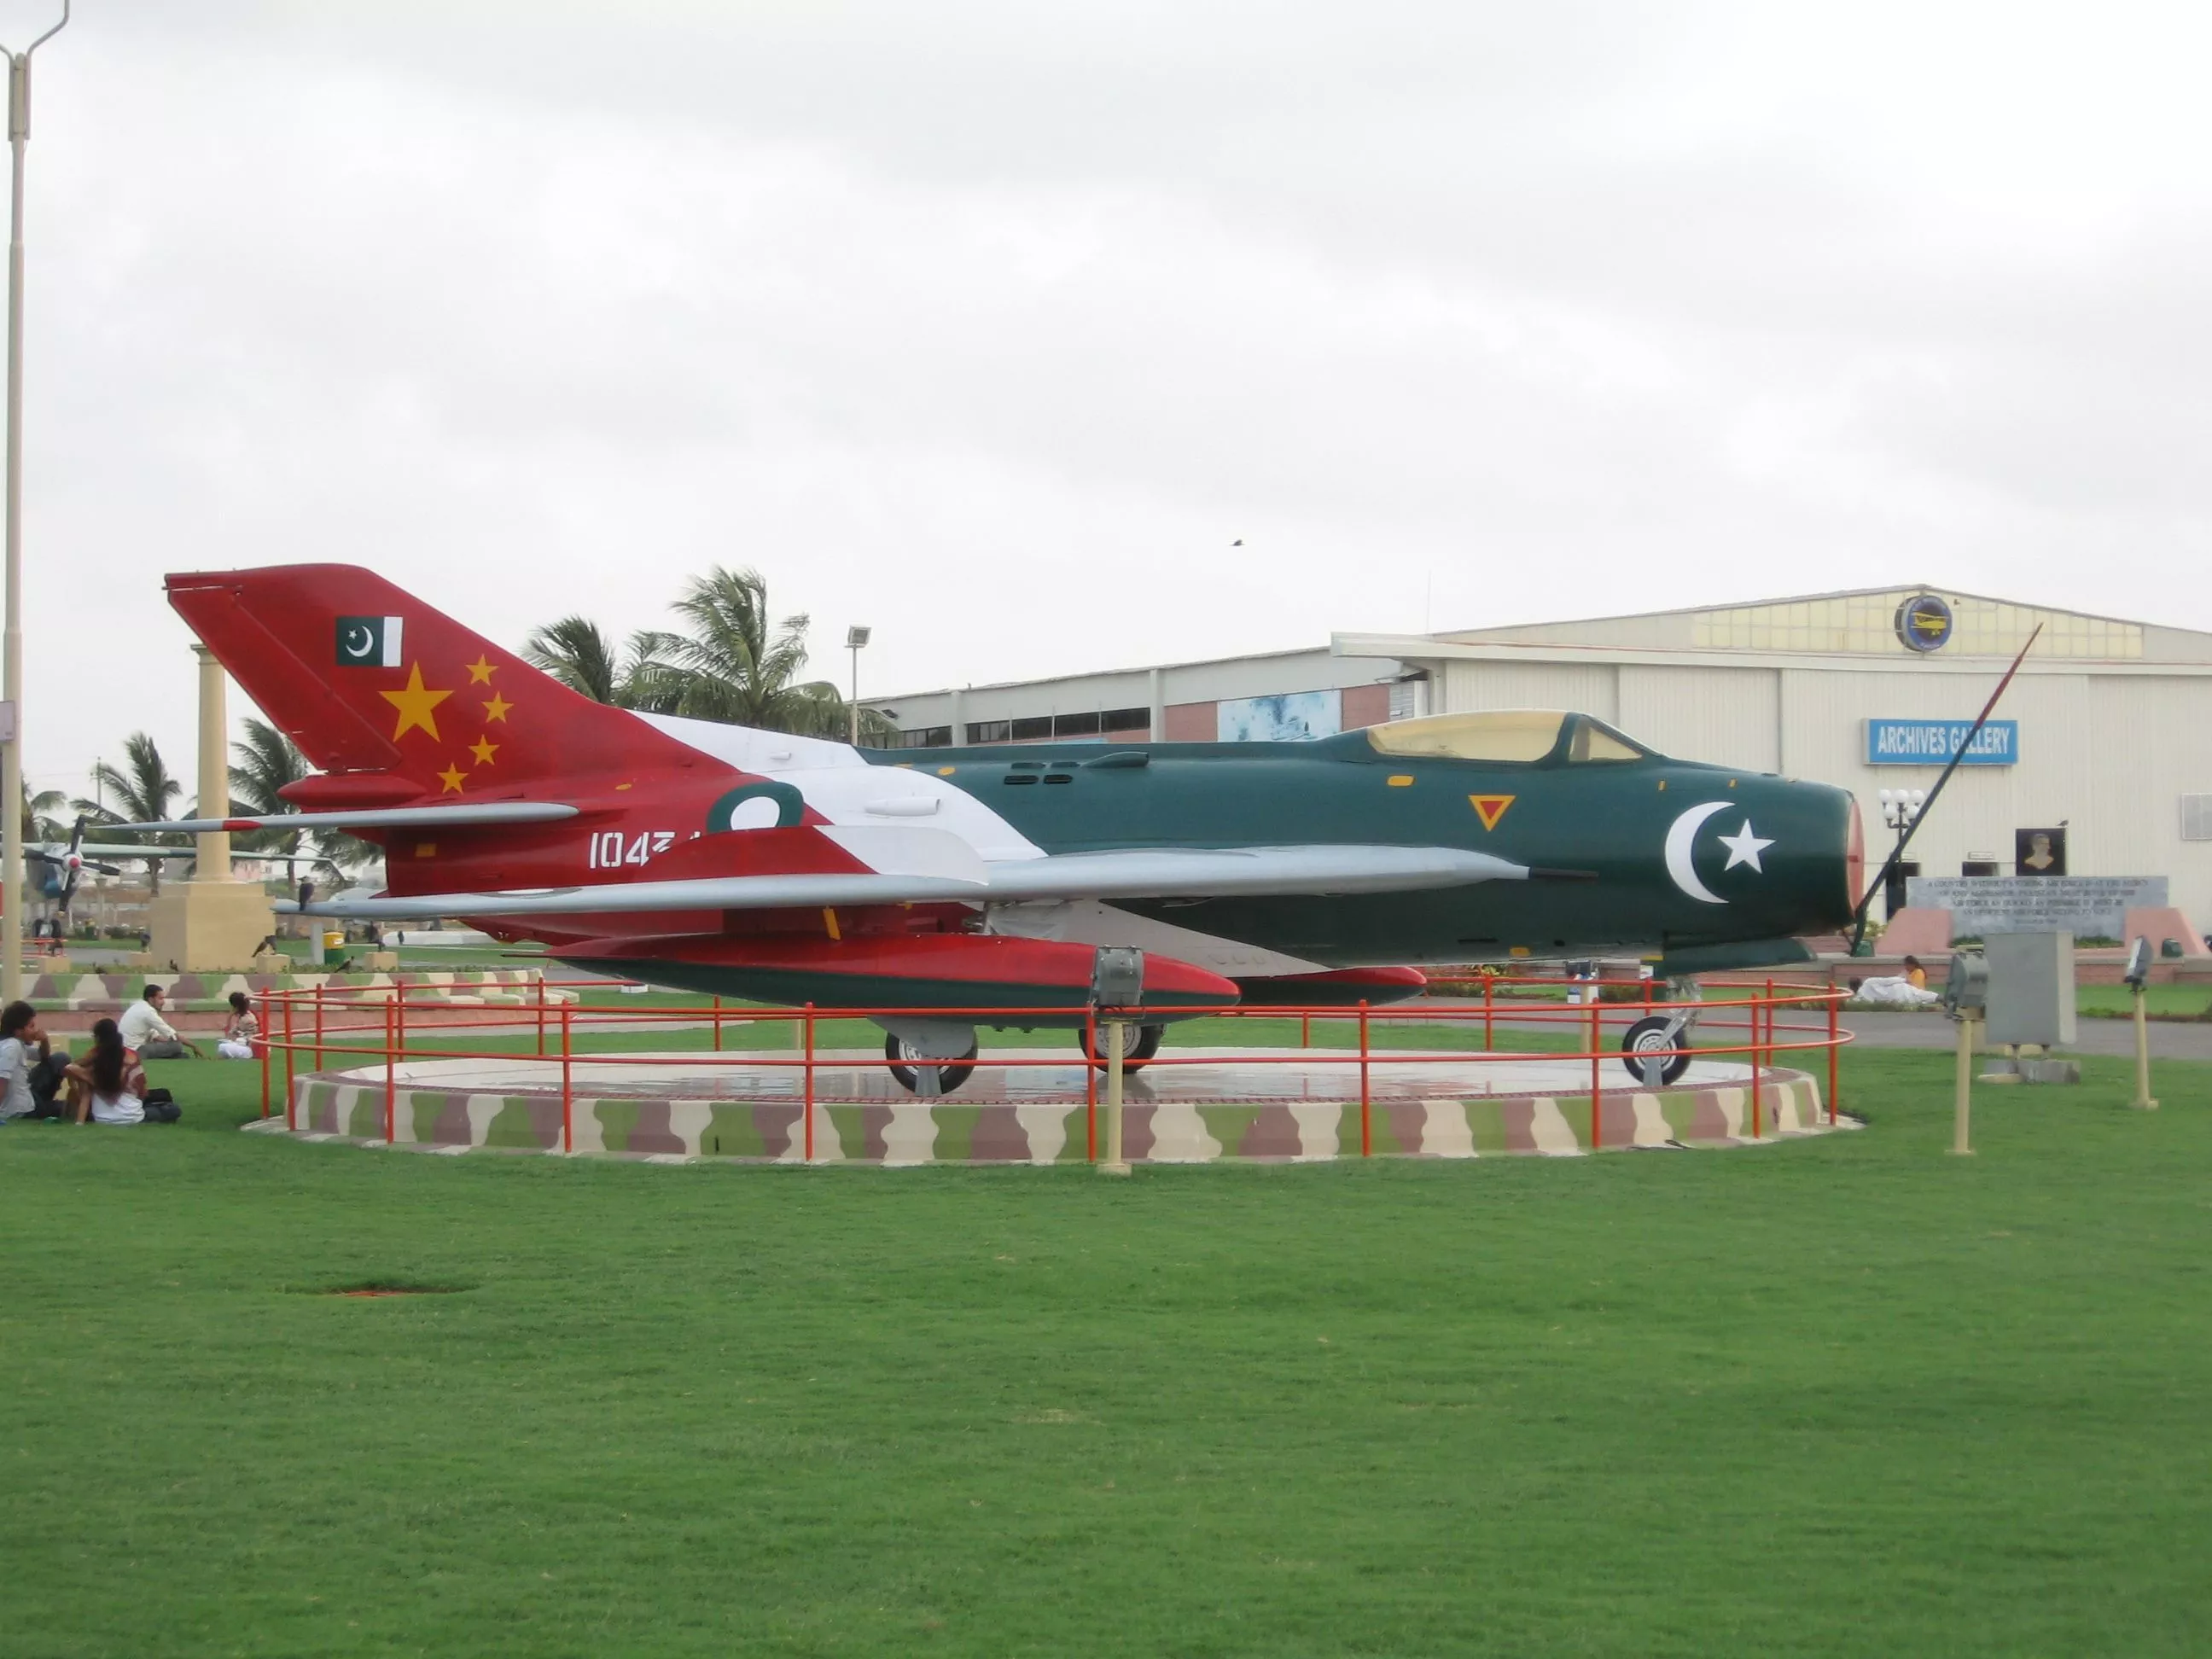 Pakistan Air Force Museum Faisal in Pakistan, South Asia | Museums - Rated 4.3